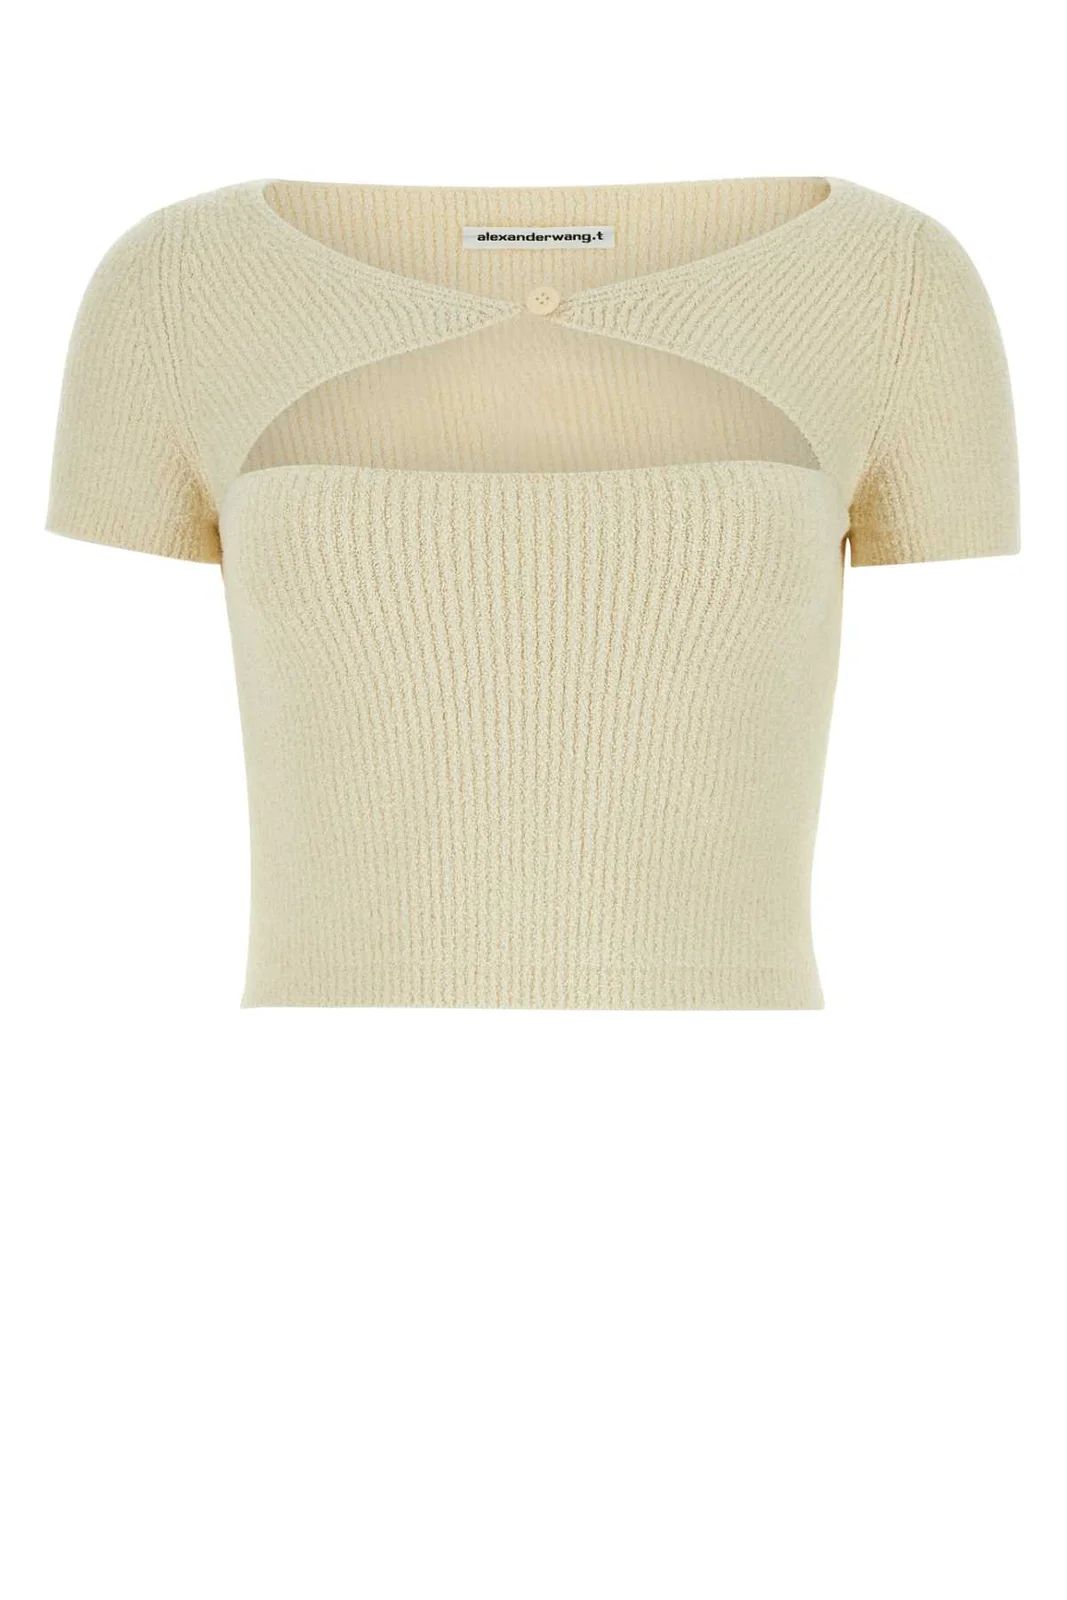 T By Alexander Wang Cut-Out Cropped Top | Cettire Global